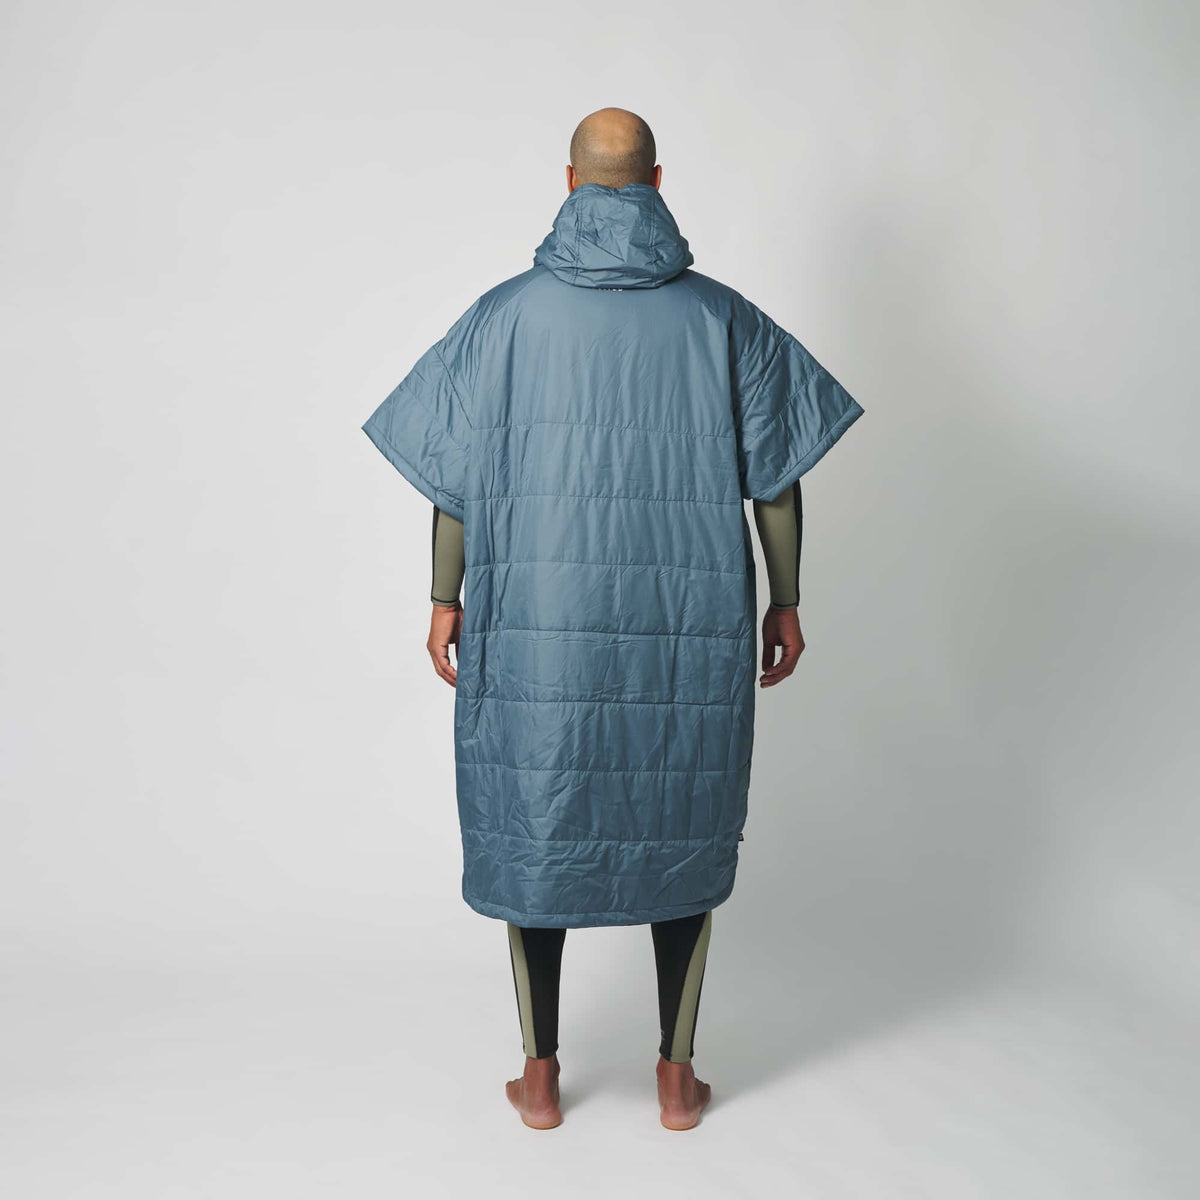 VOITED 2nd Edition Outdoor Poncho for Surfing, Camping, Vanlife & Wild Swimming - Marsh Grey / Desert Changewear VOITED 